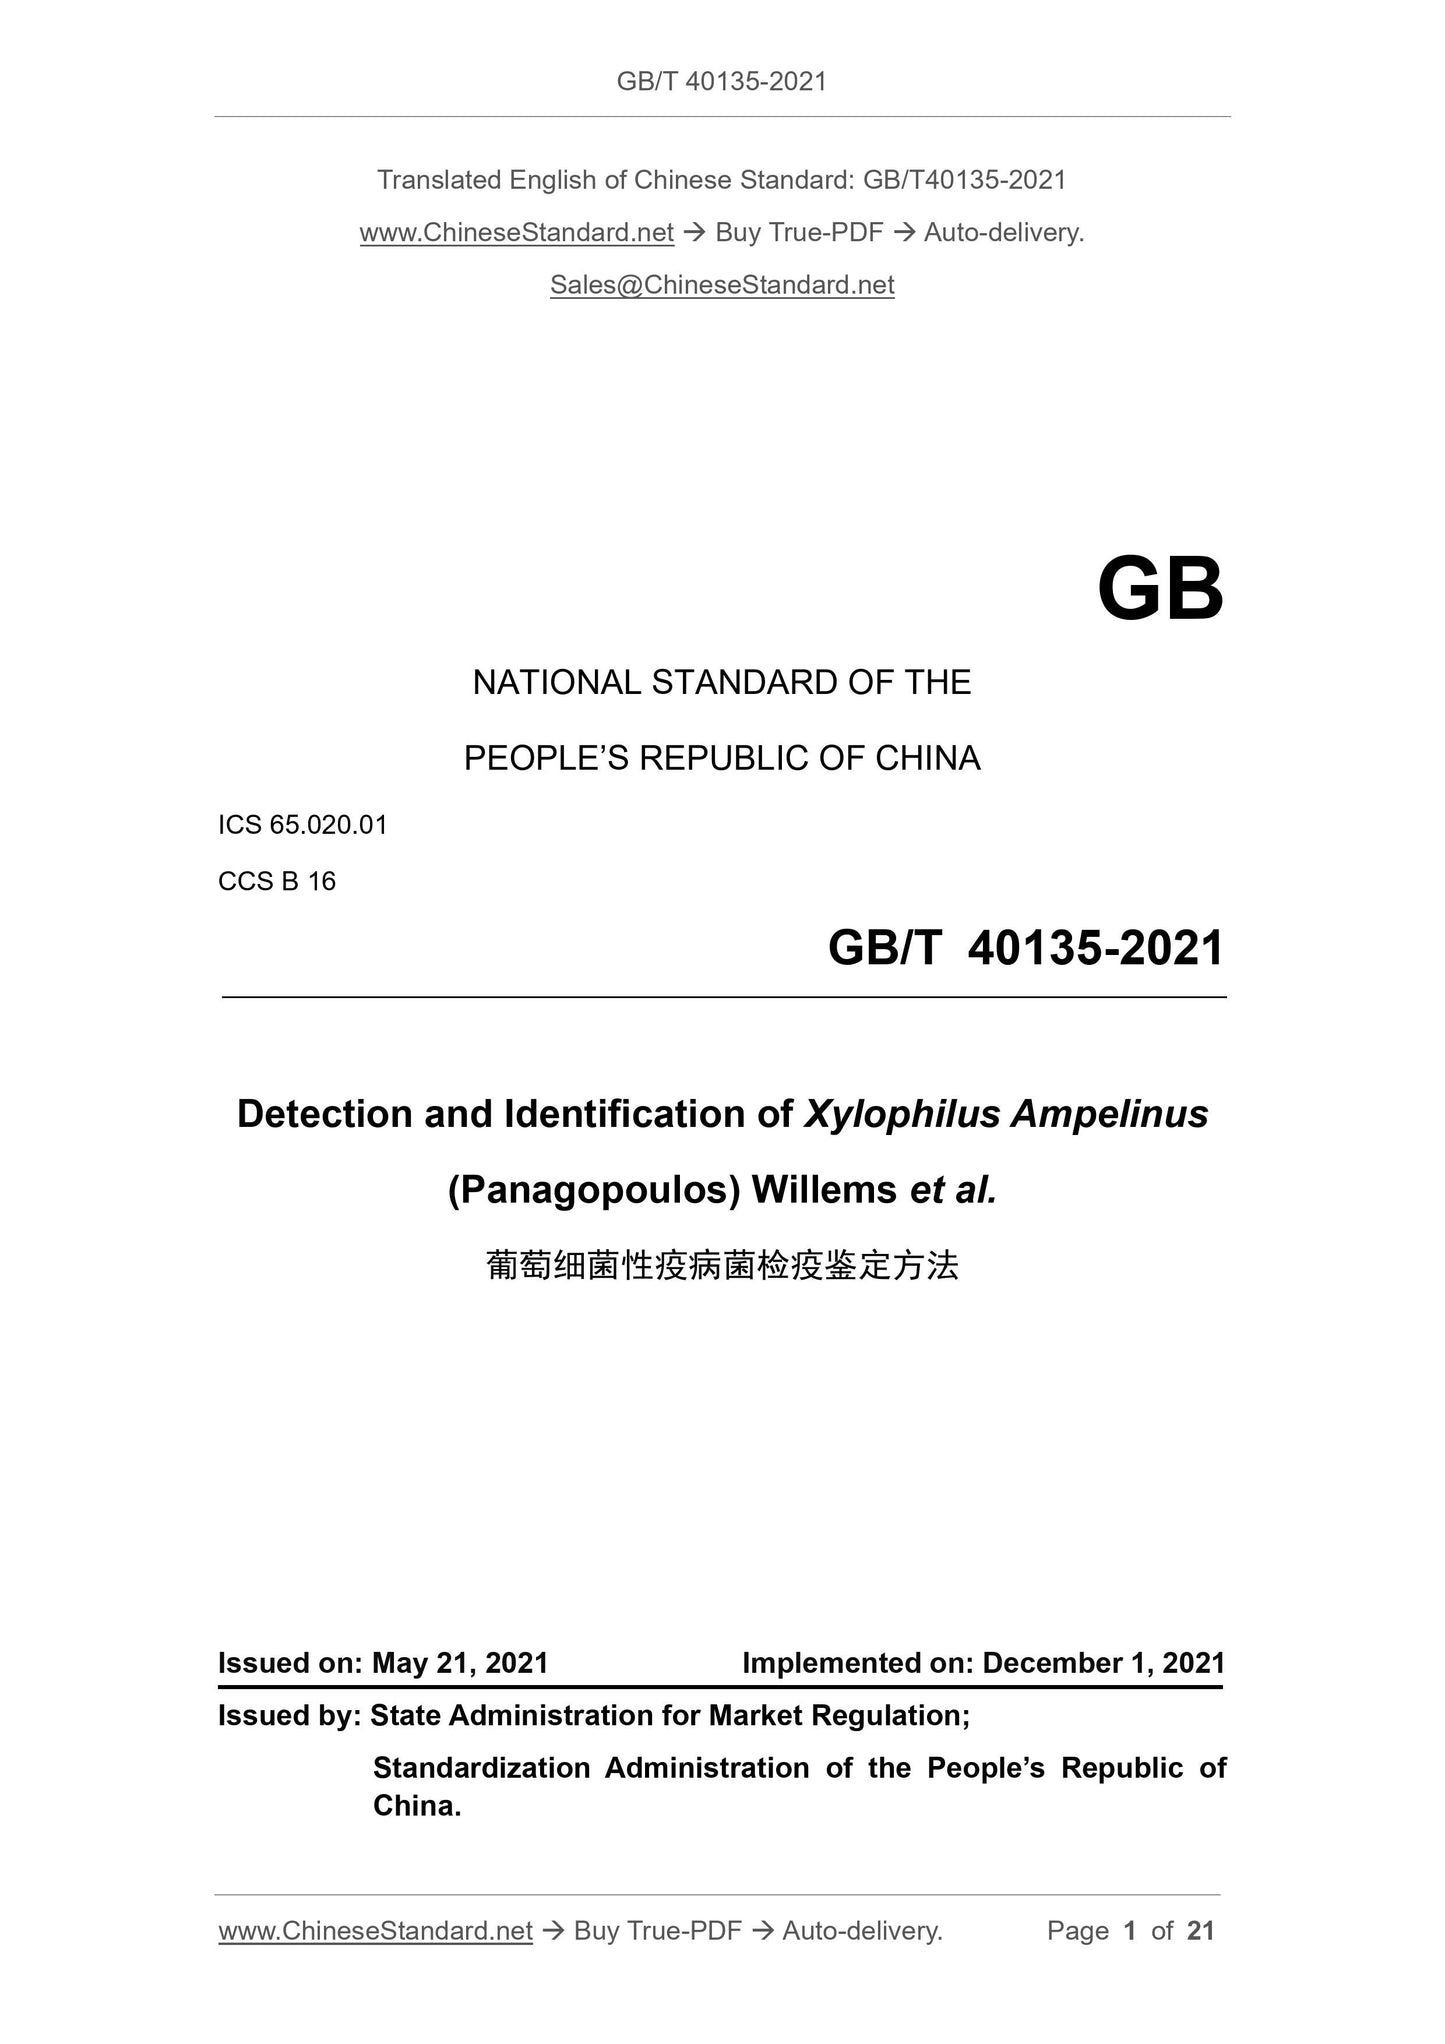 GB/T 40135-2021 Page 1